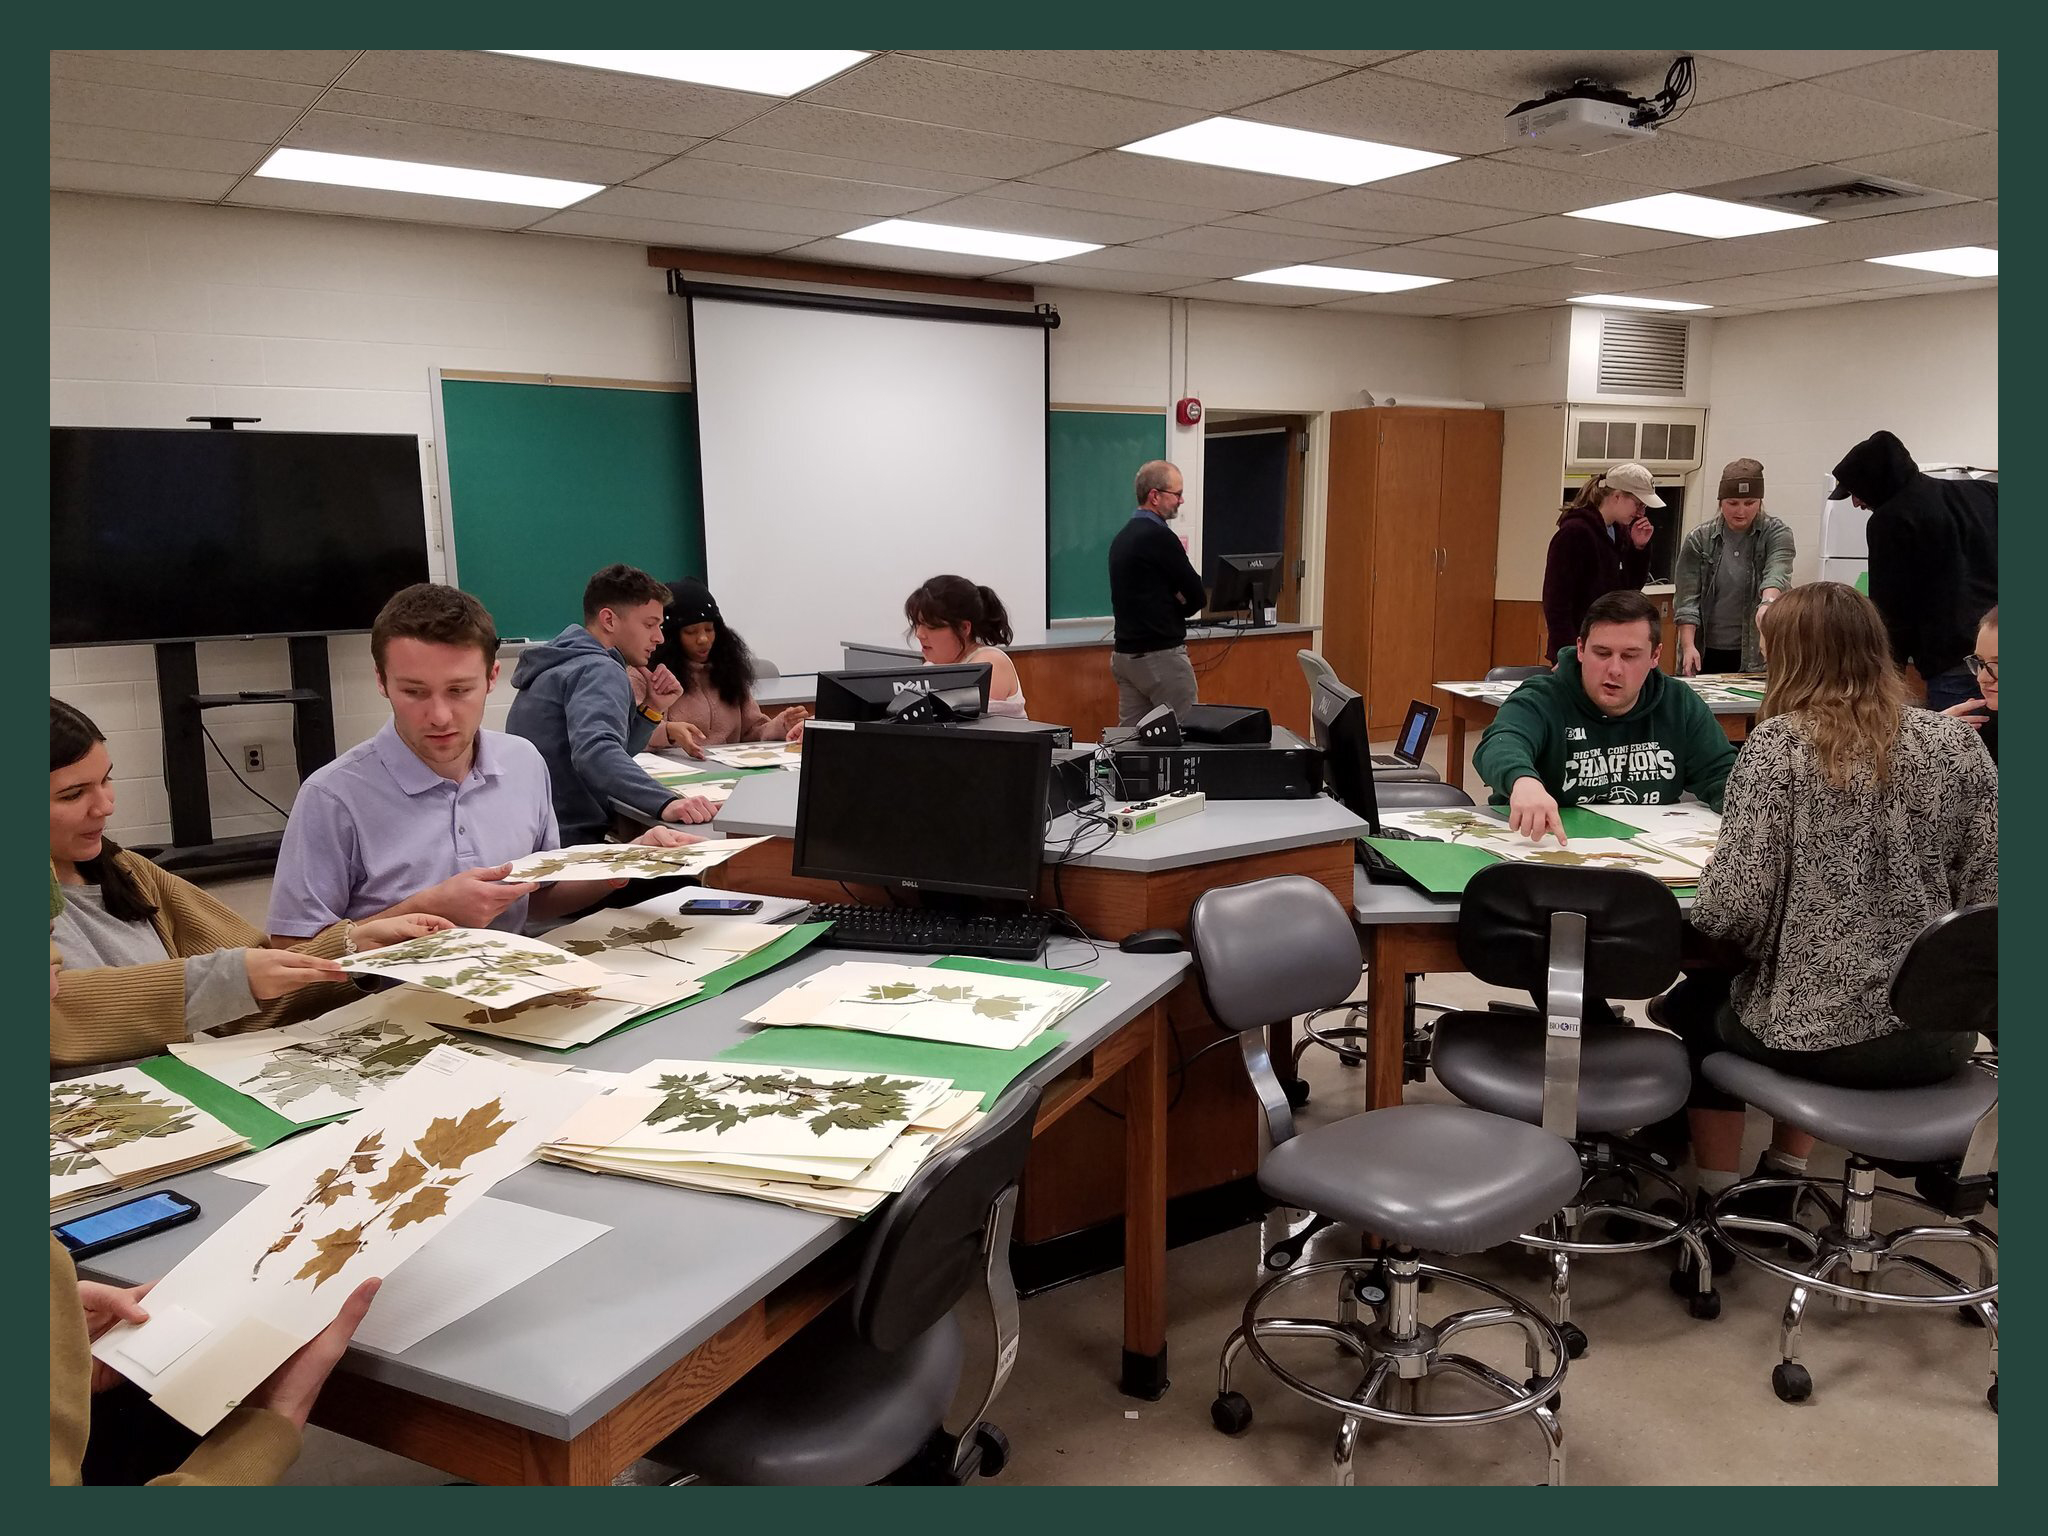 Classroom with students inspecting pressed plant specimens